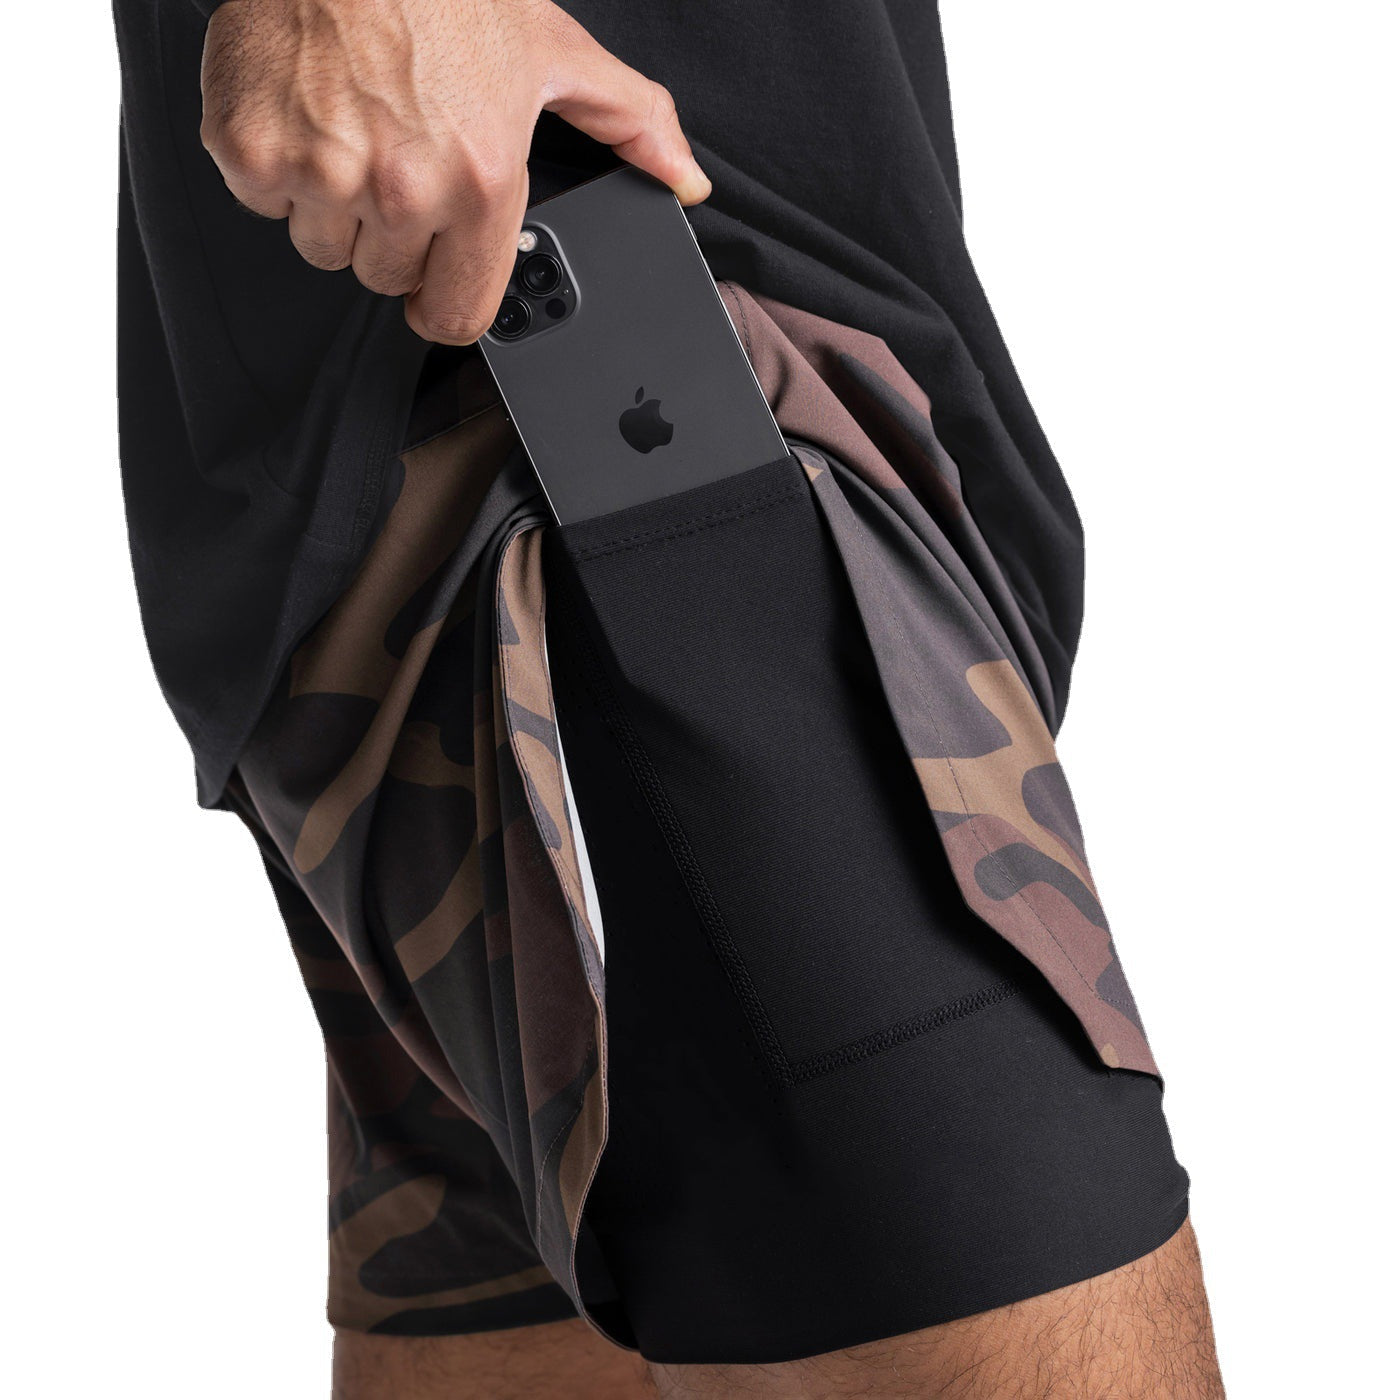 Men's Sports Fitness Leisure Lined Double Layer Shorts